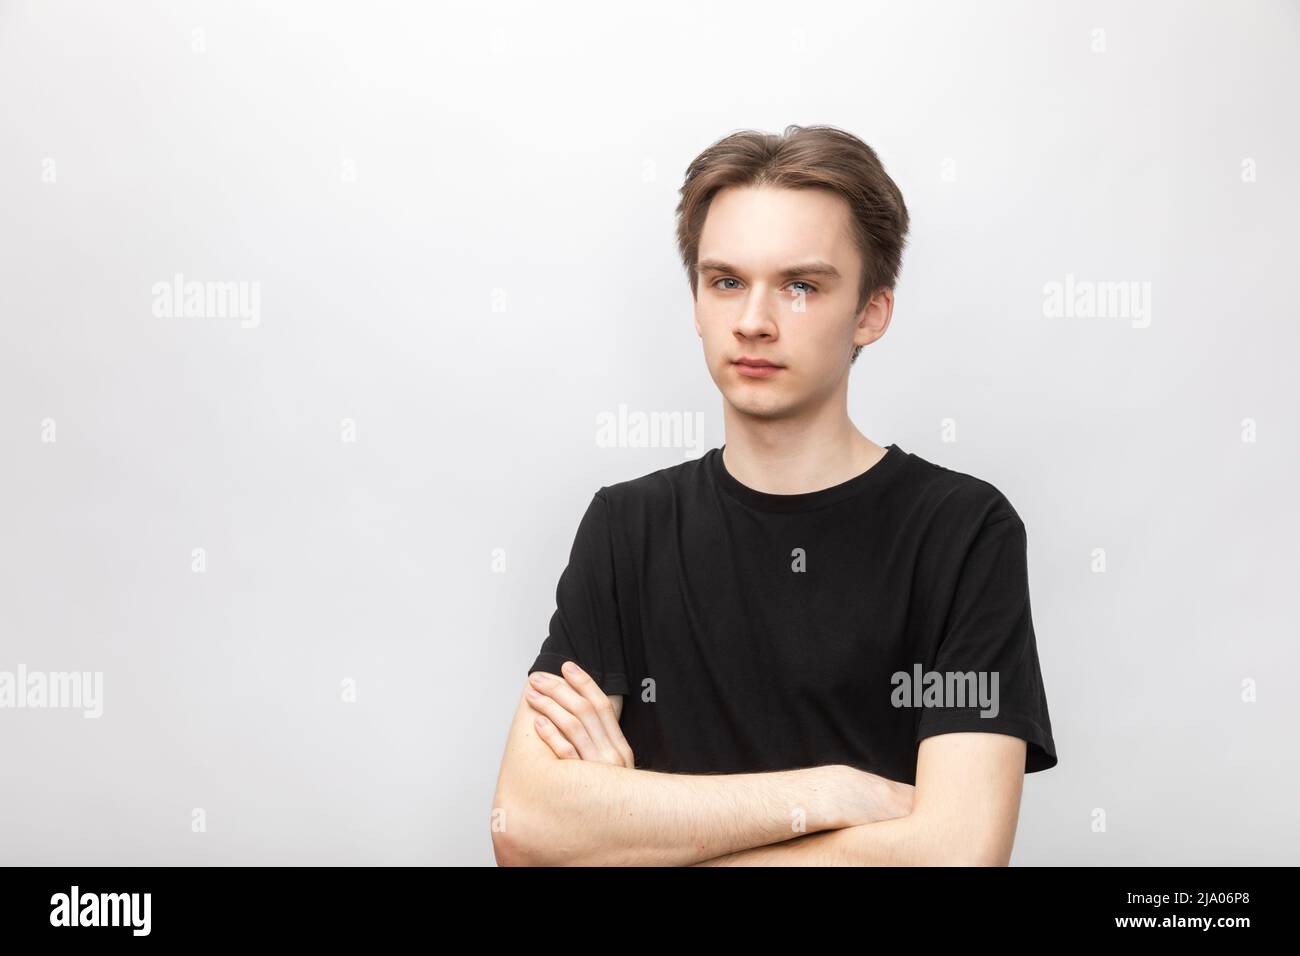 Portrait of suspicious young man wearing black tshirt holding his hands crossed looking at camera. Studio shot on gray background Stock Photo